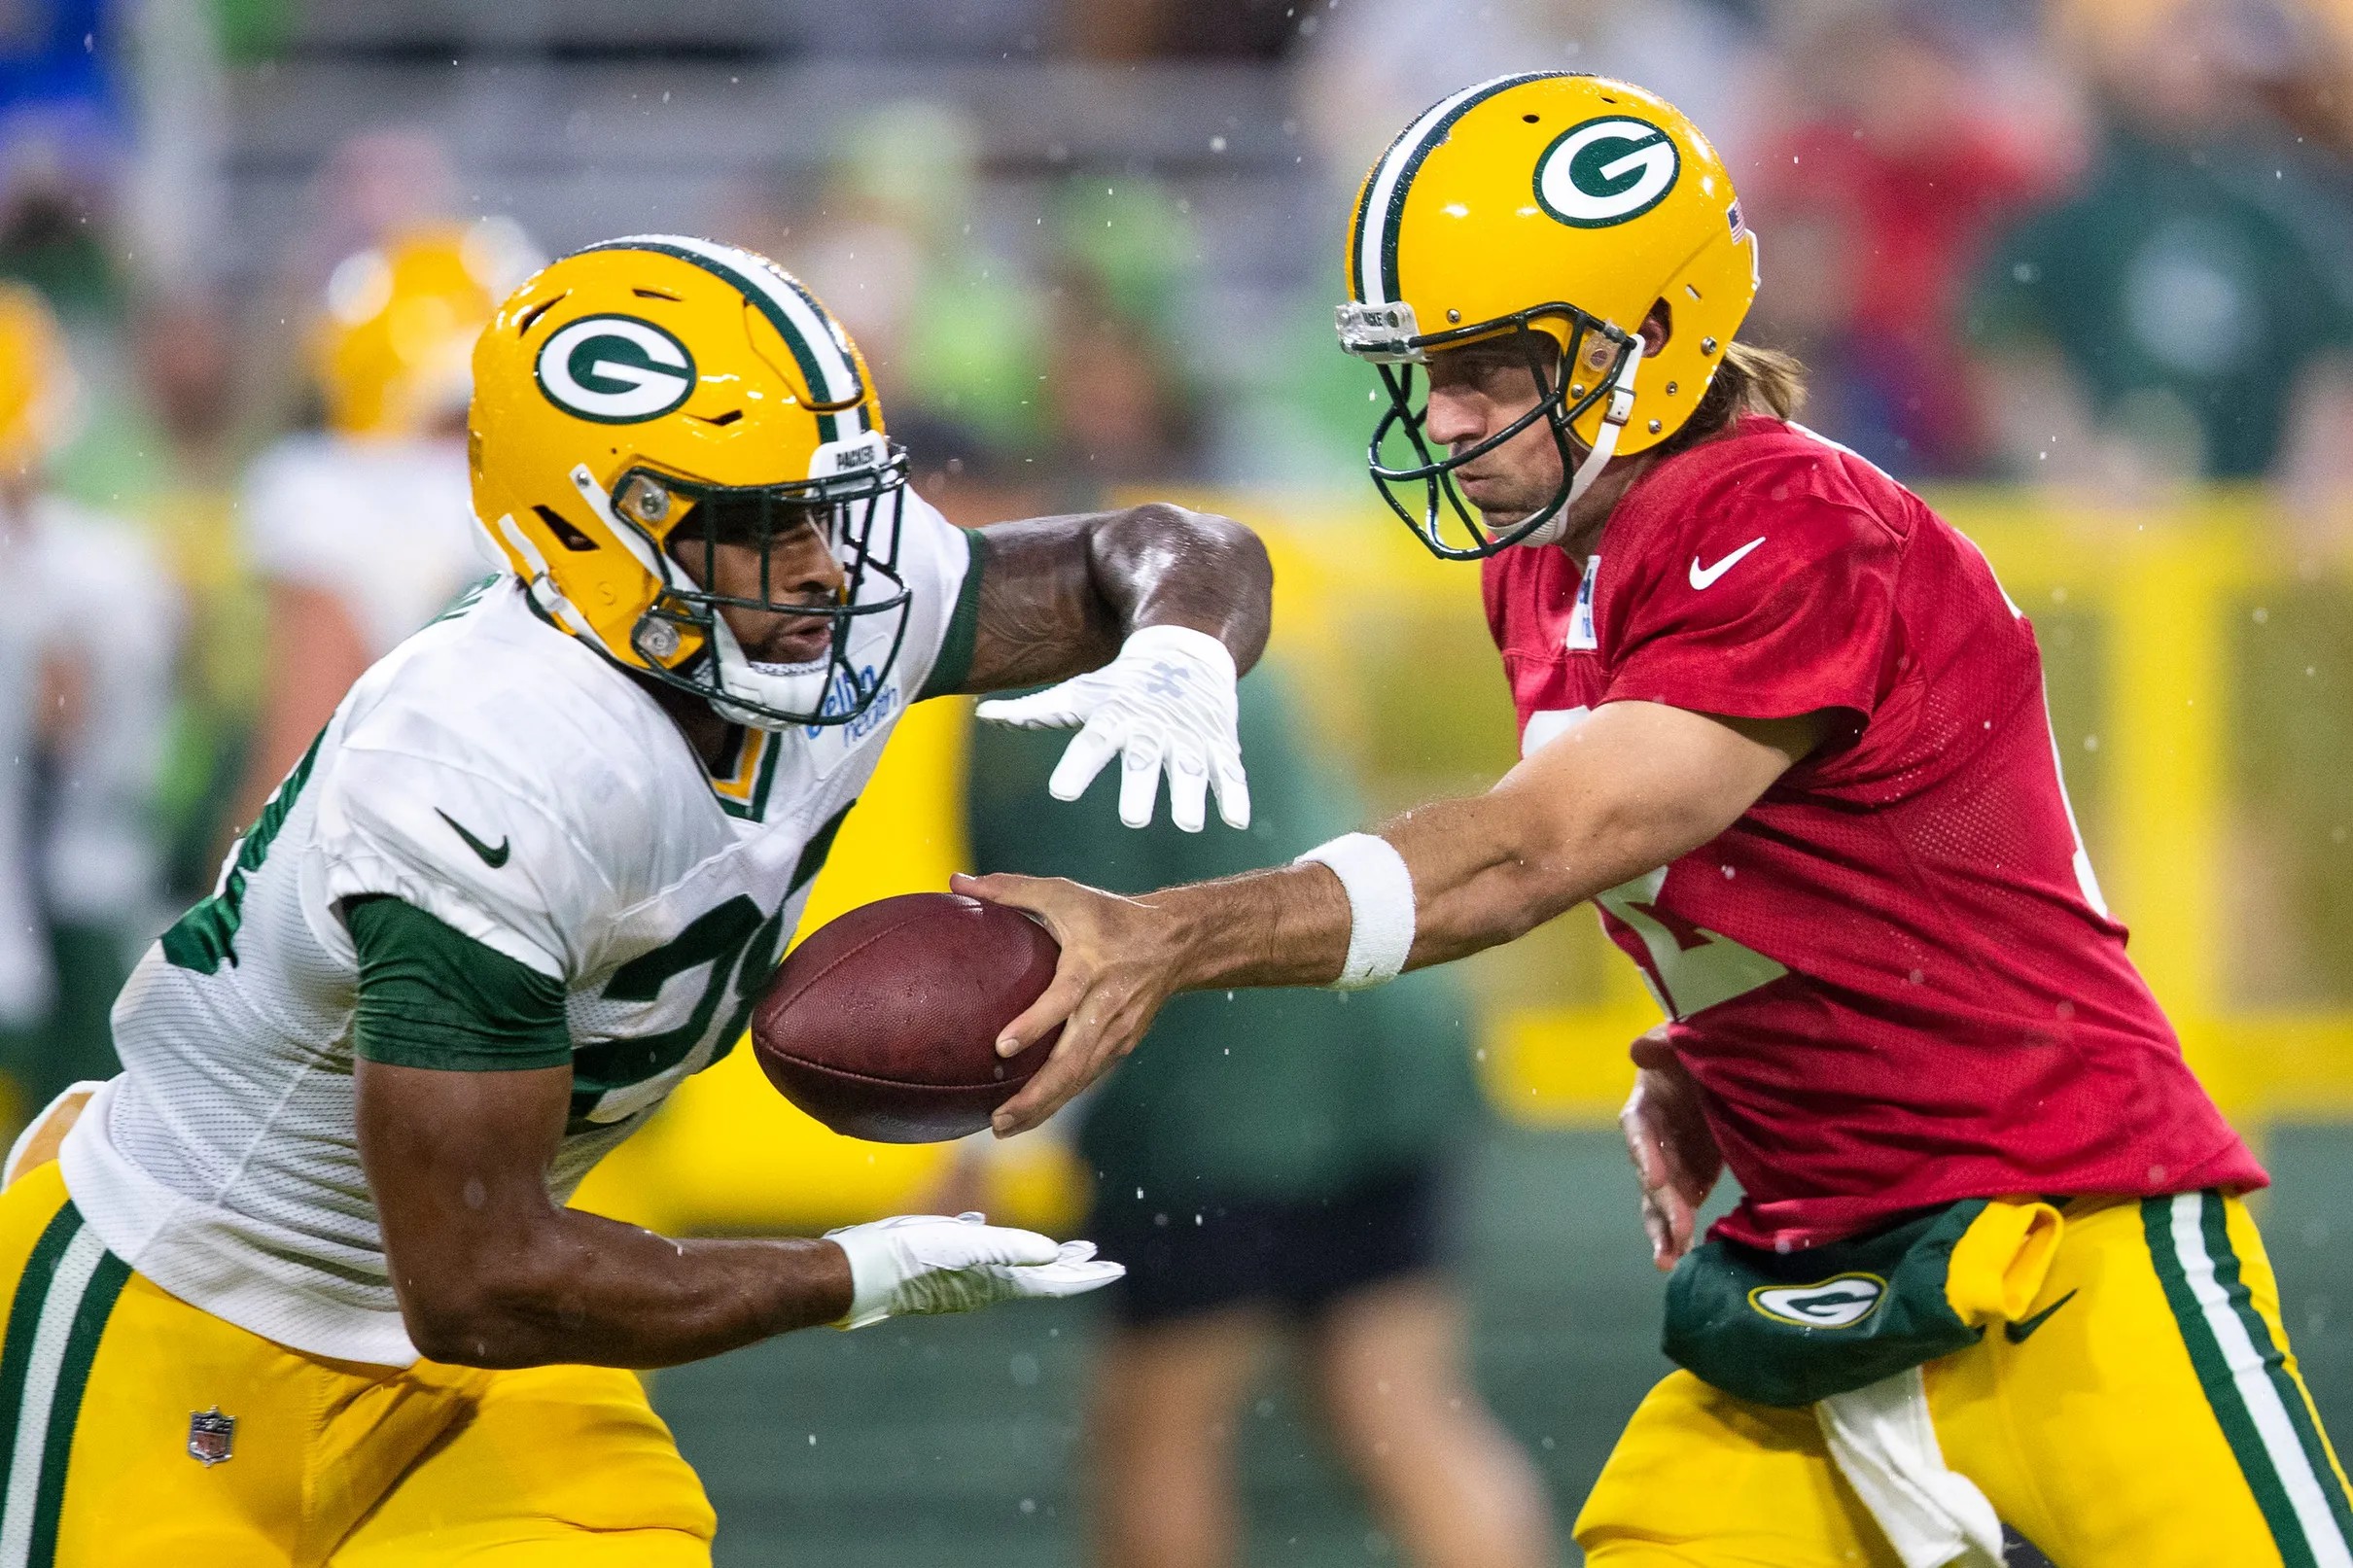 Packers Family Night 2022 Start time and schedule, TV channels, & more